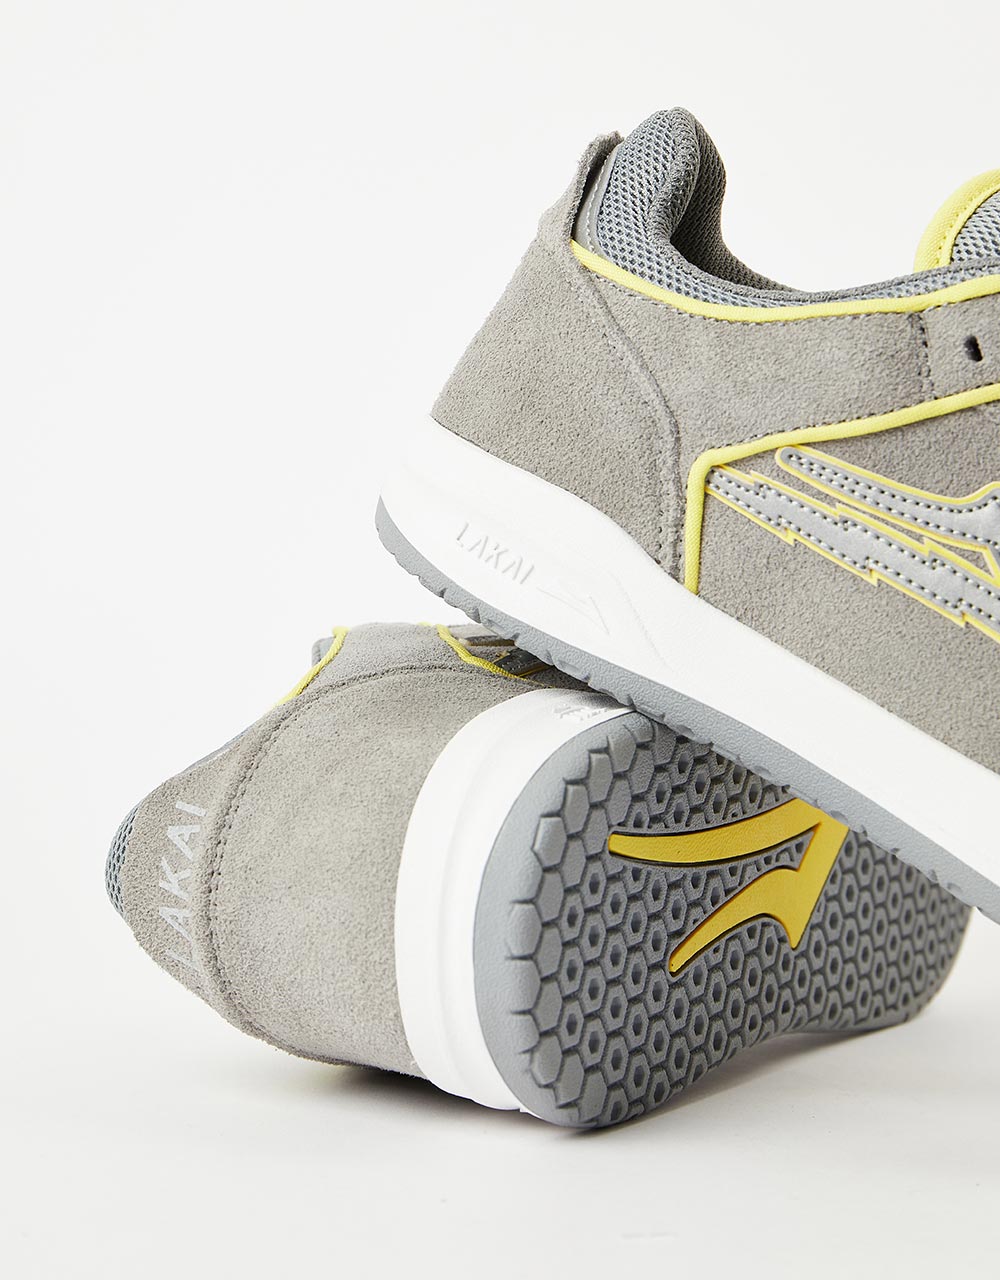 Lakai Telford Low Skate Shoes - Grey/Reflective Suede